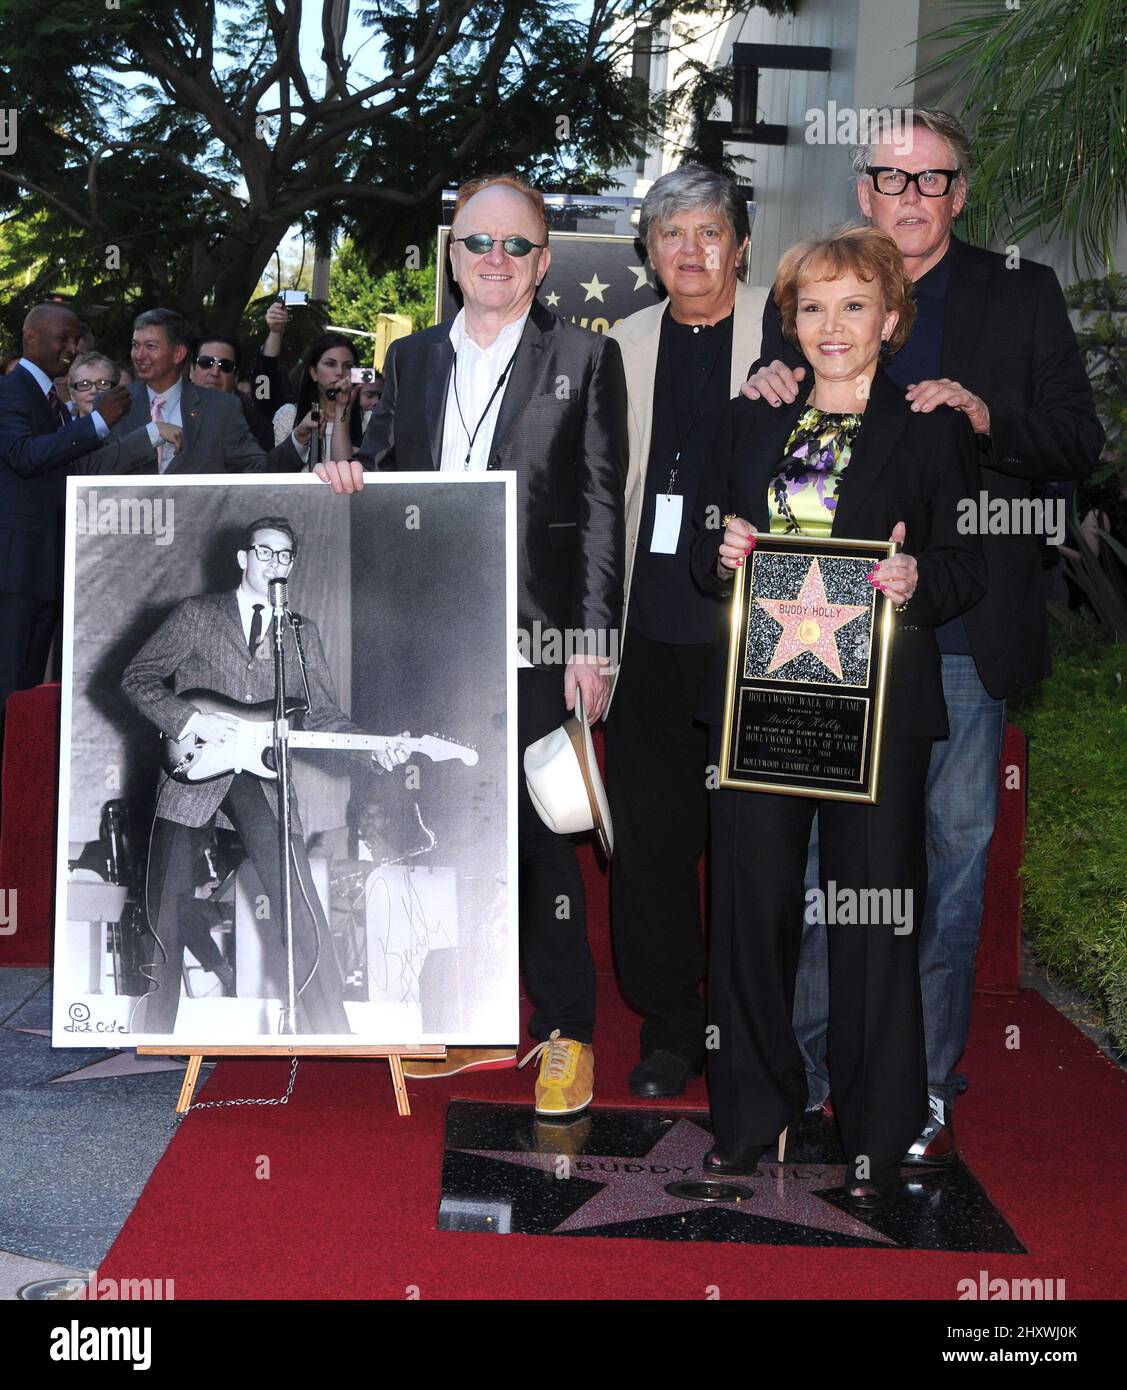 Peter Asher, Phil Everly, Maria Elena Holly and Gary Busey pose as Buddy Holly is honored on the Hollywood Walk of Fame in front of the Capital Records Building, Hollywood, California on September 07, 2011. Stock Photo